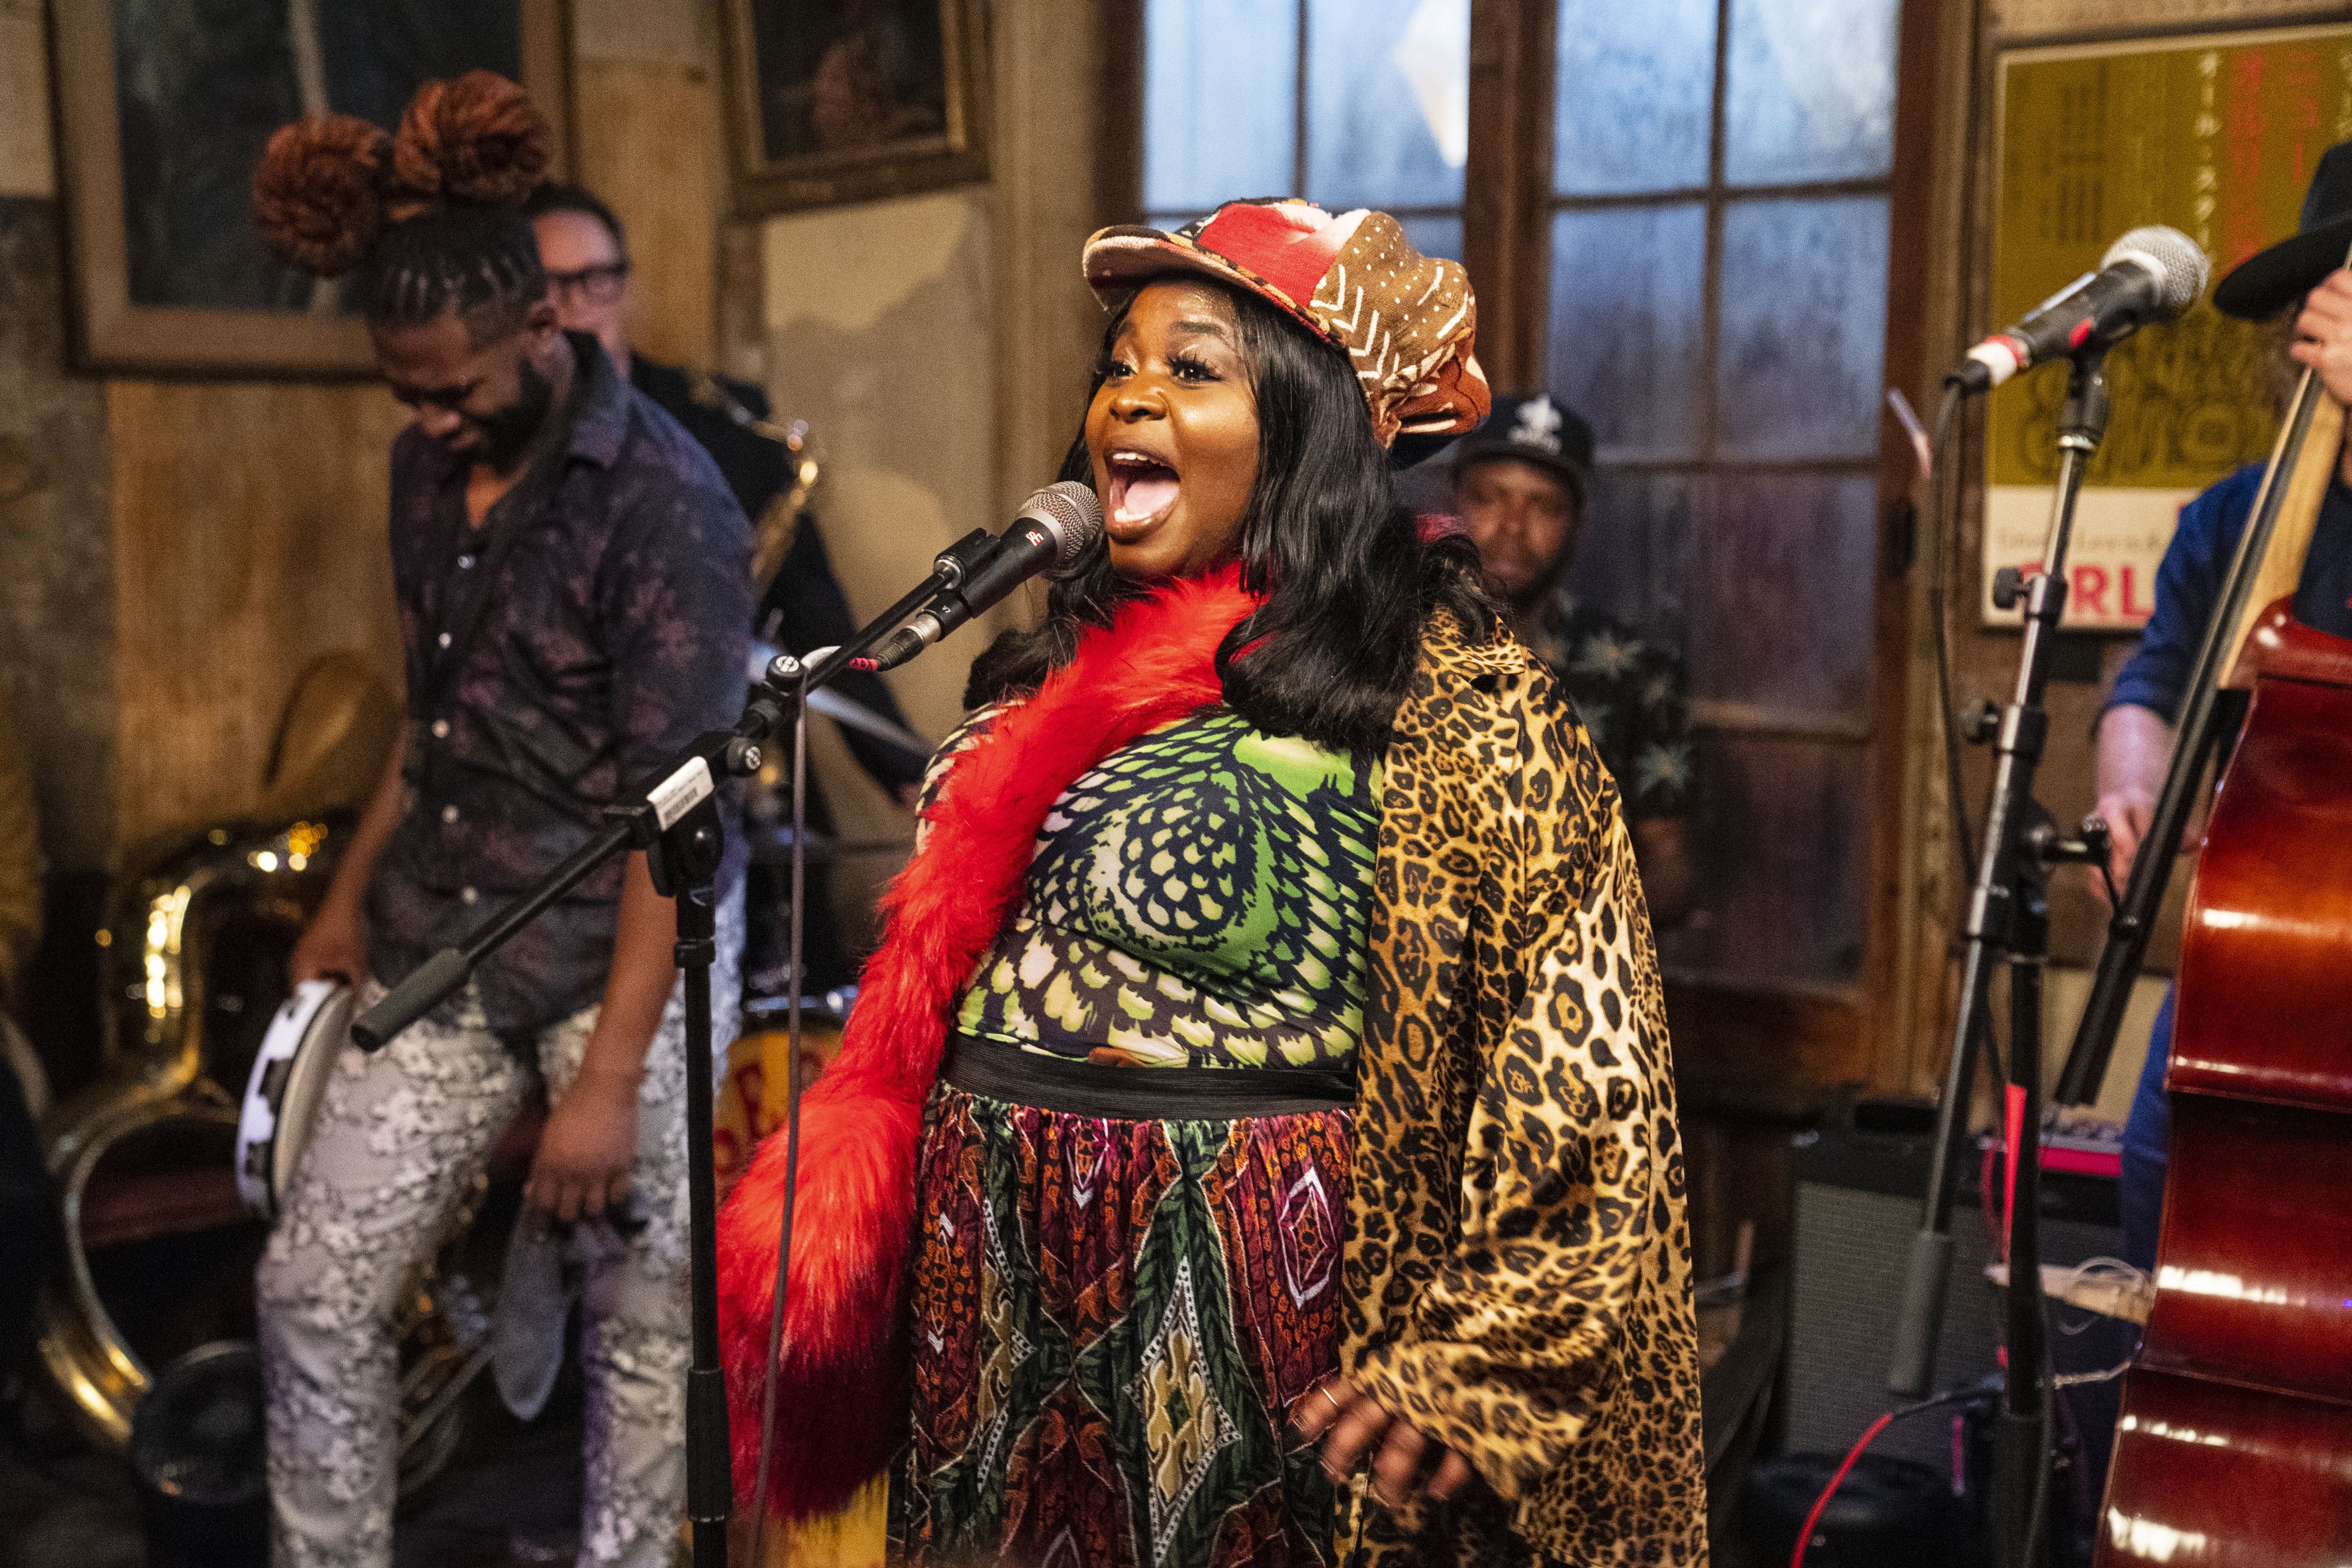 Tank Ball performs inside Preservation Hall. She stands at a microphone while other musicians can be seen behind her, including a bass player, drummer, and someone holding a tambourine.